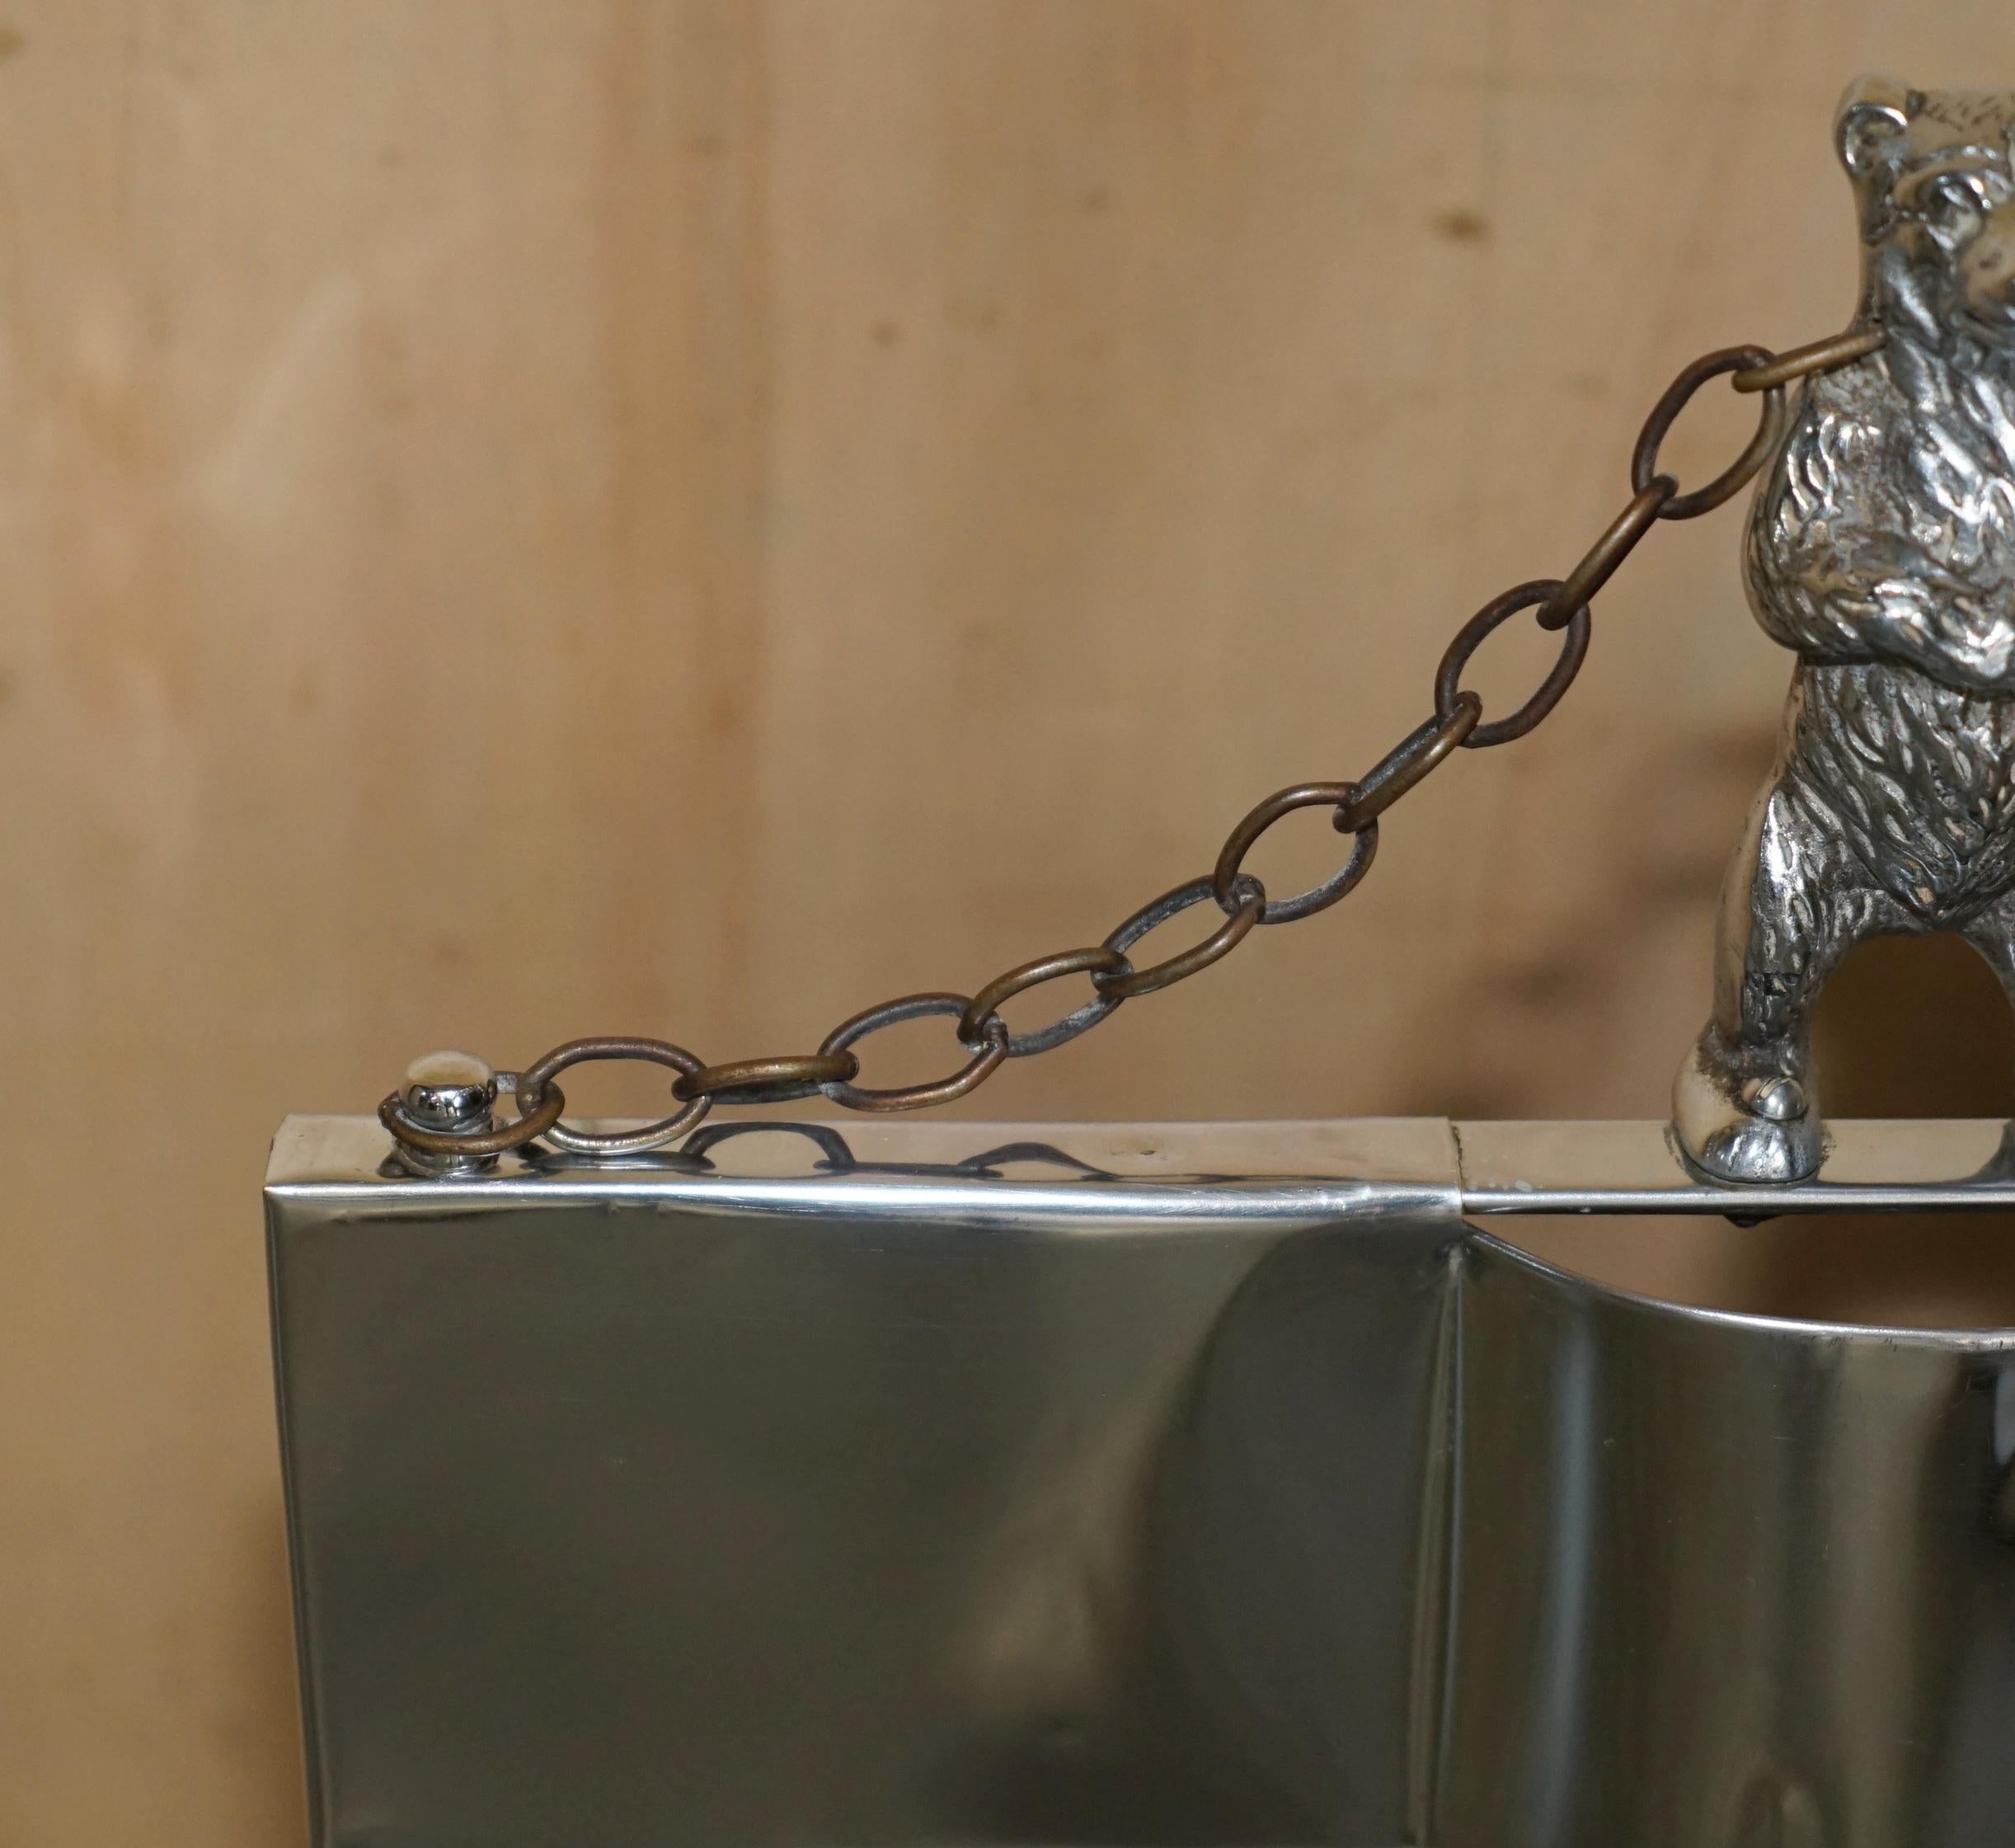 ART DECO ANTiQUE CIRCA 1920er Jahre POLISHED CHROME FIRE GUARD SCREEN WITH BEAR ON TOP (Poliert) im Angebot